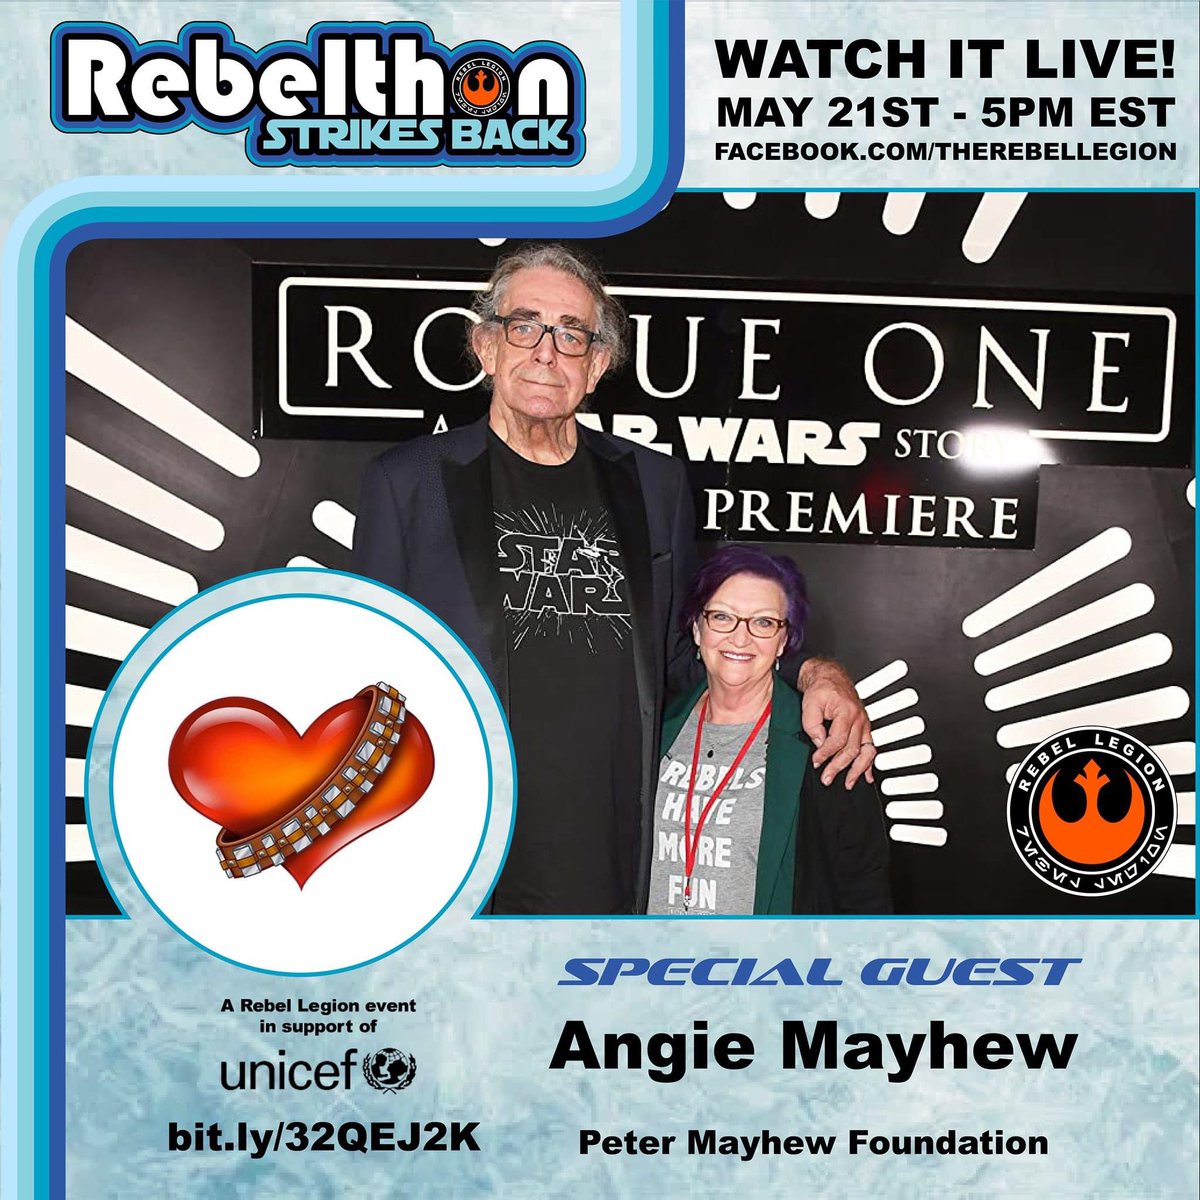 We have a few more exciting guests to announce in the meantime, the first of which is Angie Mayhew, of The Peter Mayhew Foundation! She'll be joining our broadcast on this page at 7 PM Eastern Daylight Time (EDT) on Saturday, May 22nd https://t.co/qHpTjVp1sT